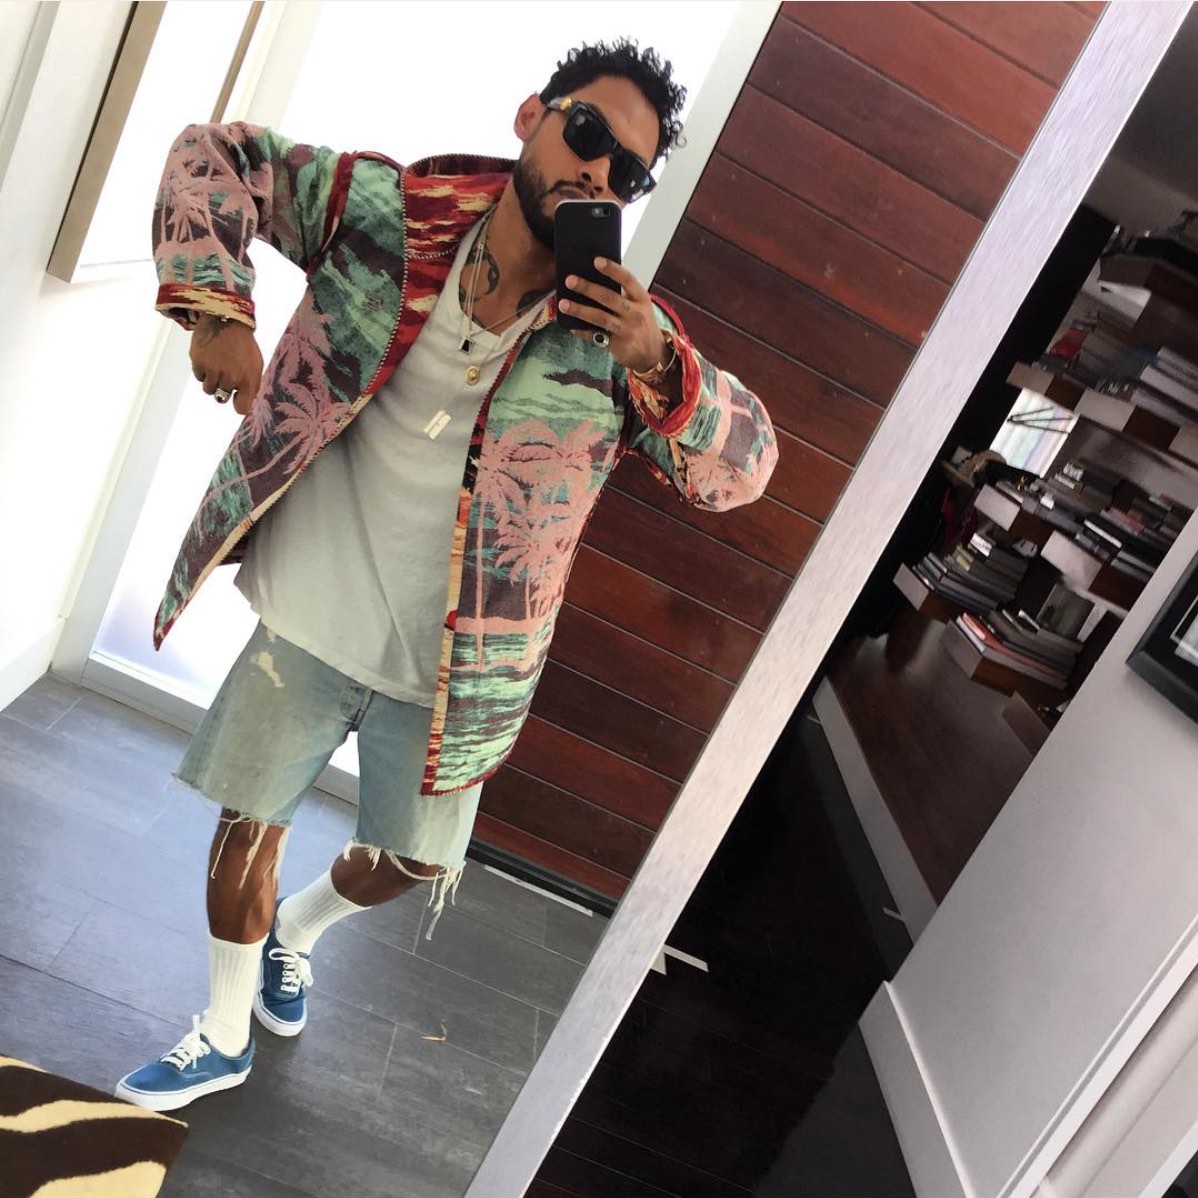 Miguel shows off his moves and style on instagram